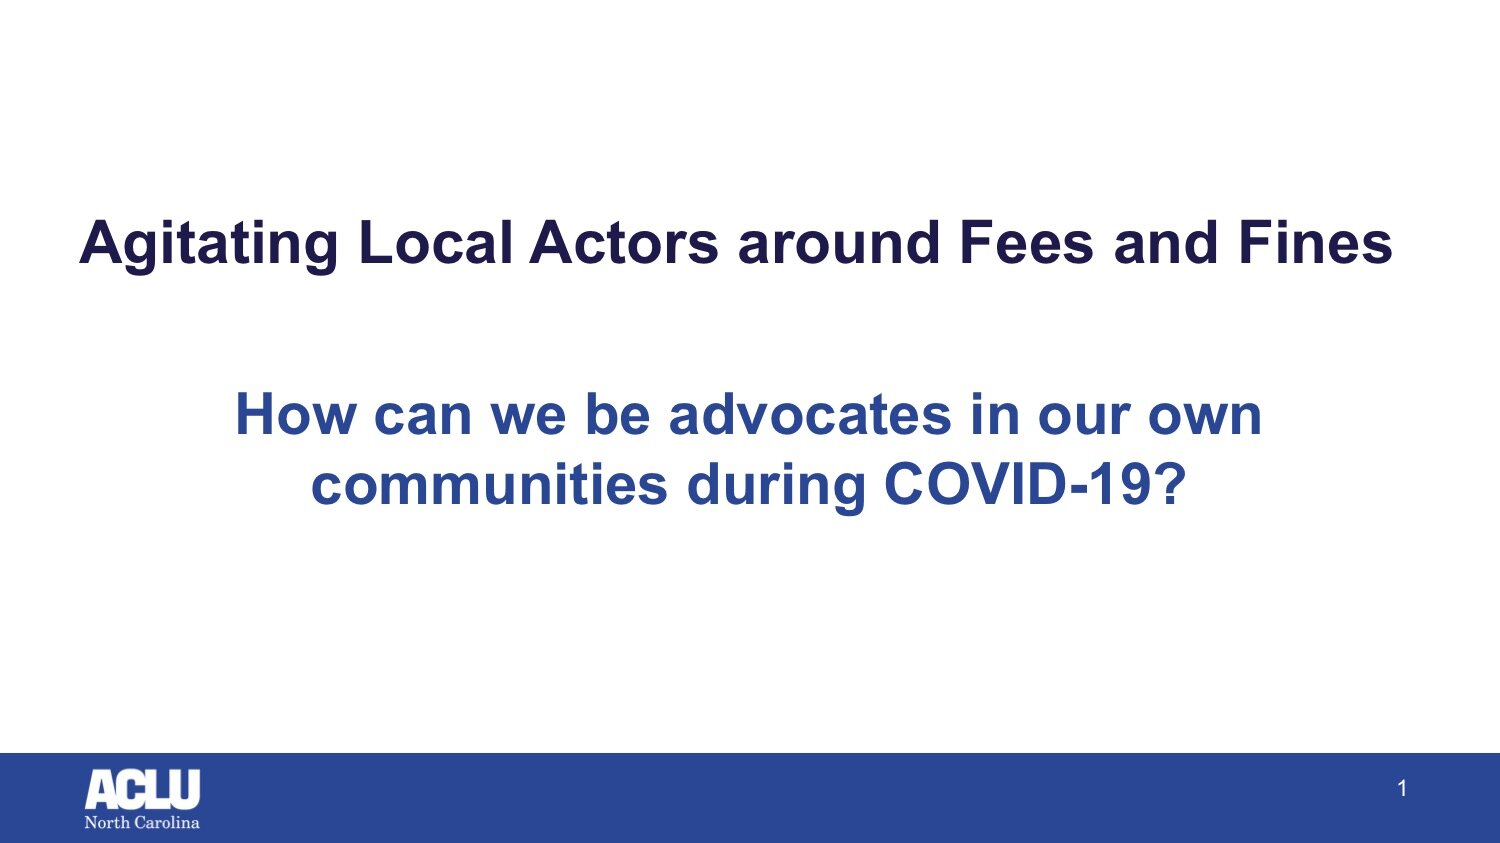 Agitating Local Actors around Fees and Fines